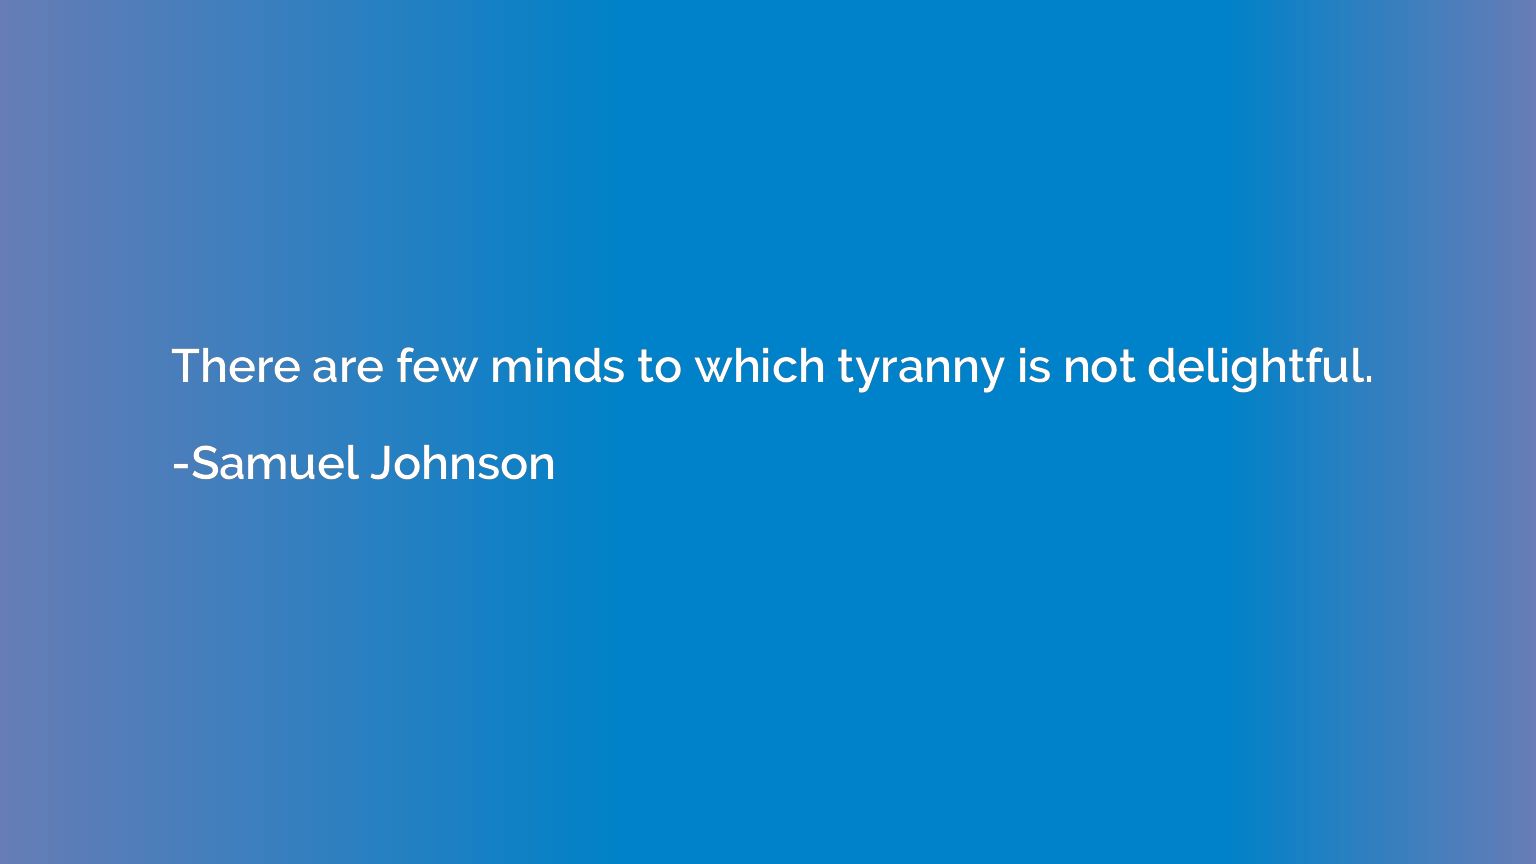 There are few minds to which tyranny is not delightful.